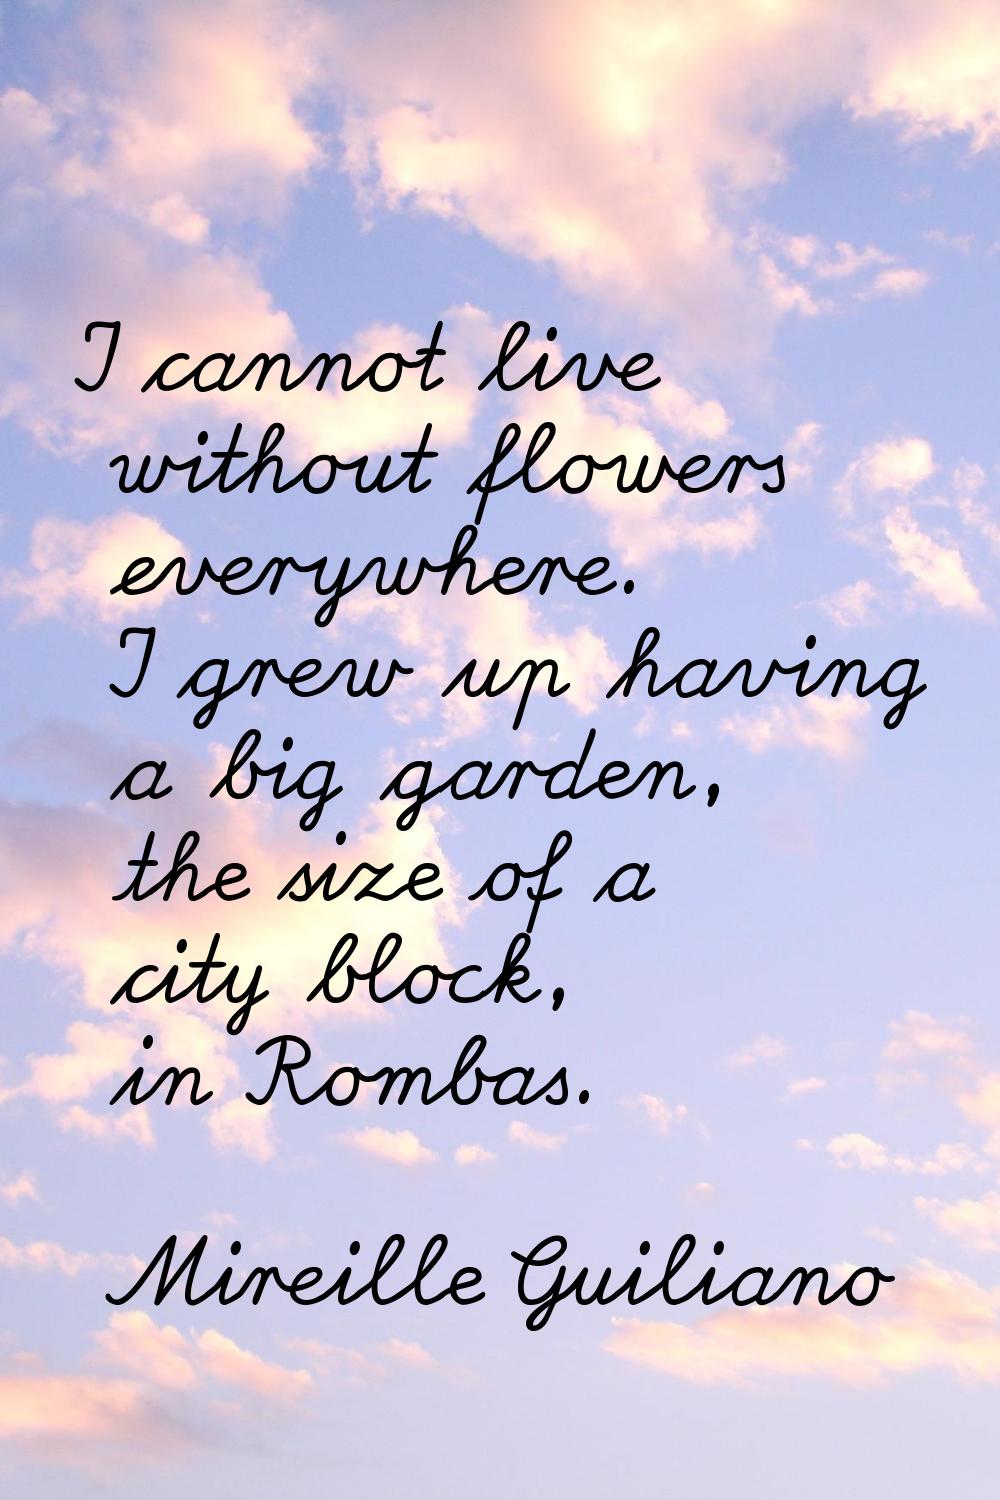 I cannot live without flowers everywhere. I grew up having a big garden, the size of a city block, 